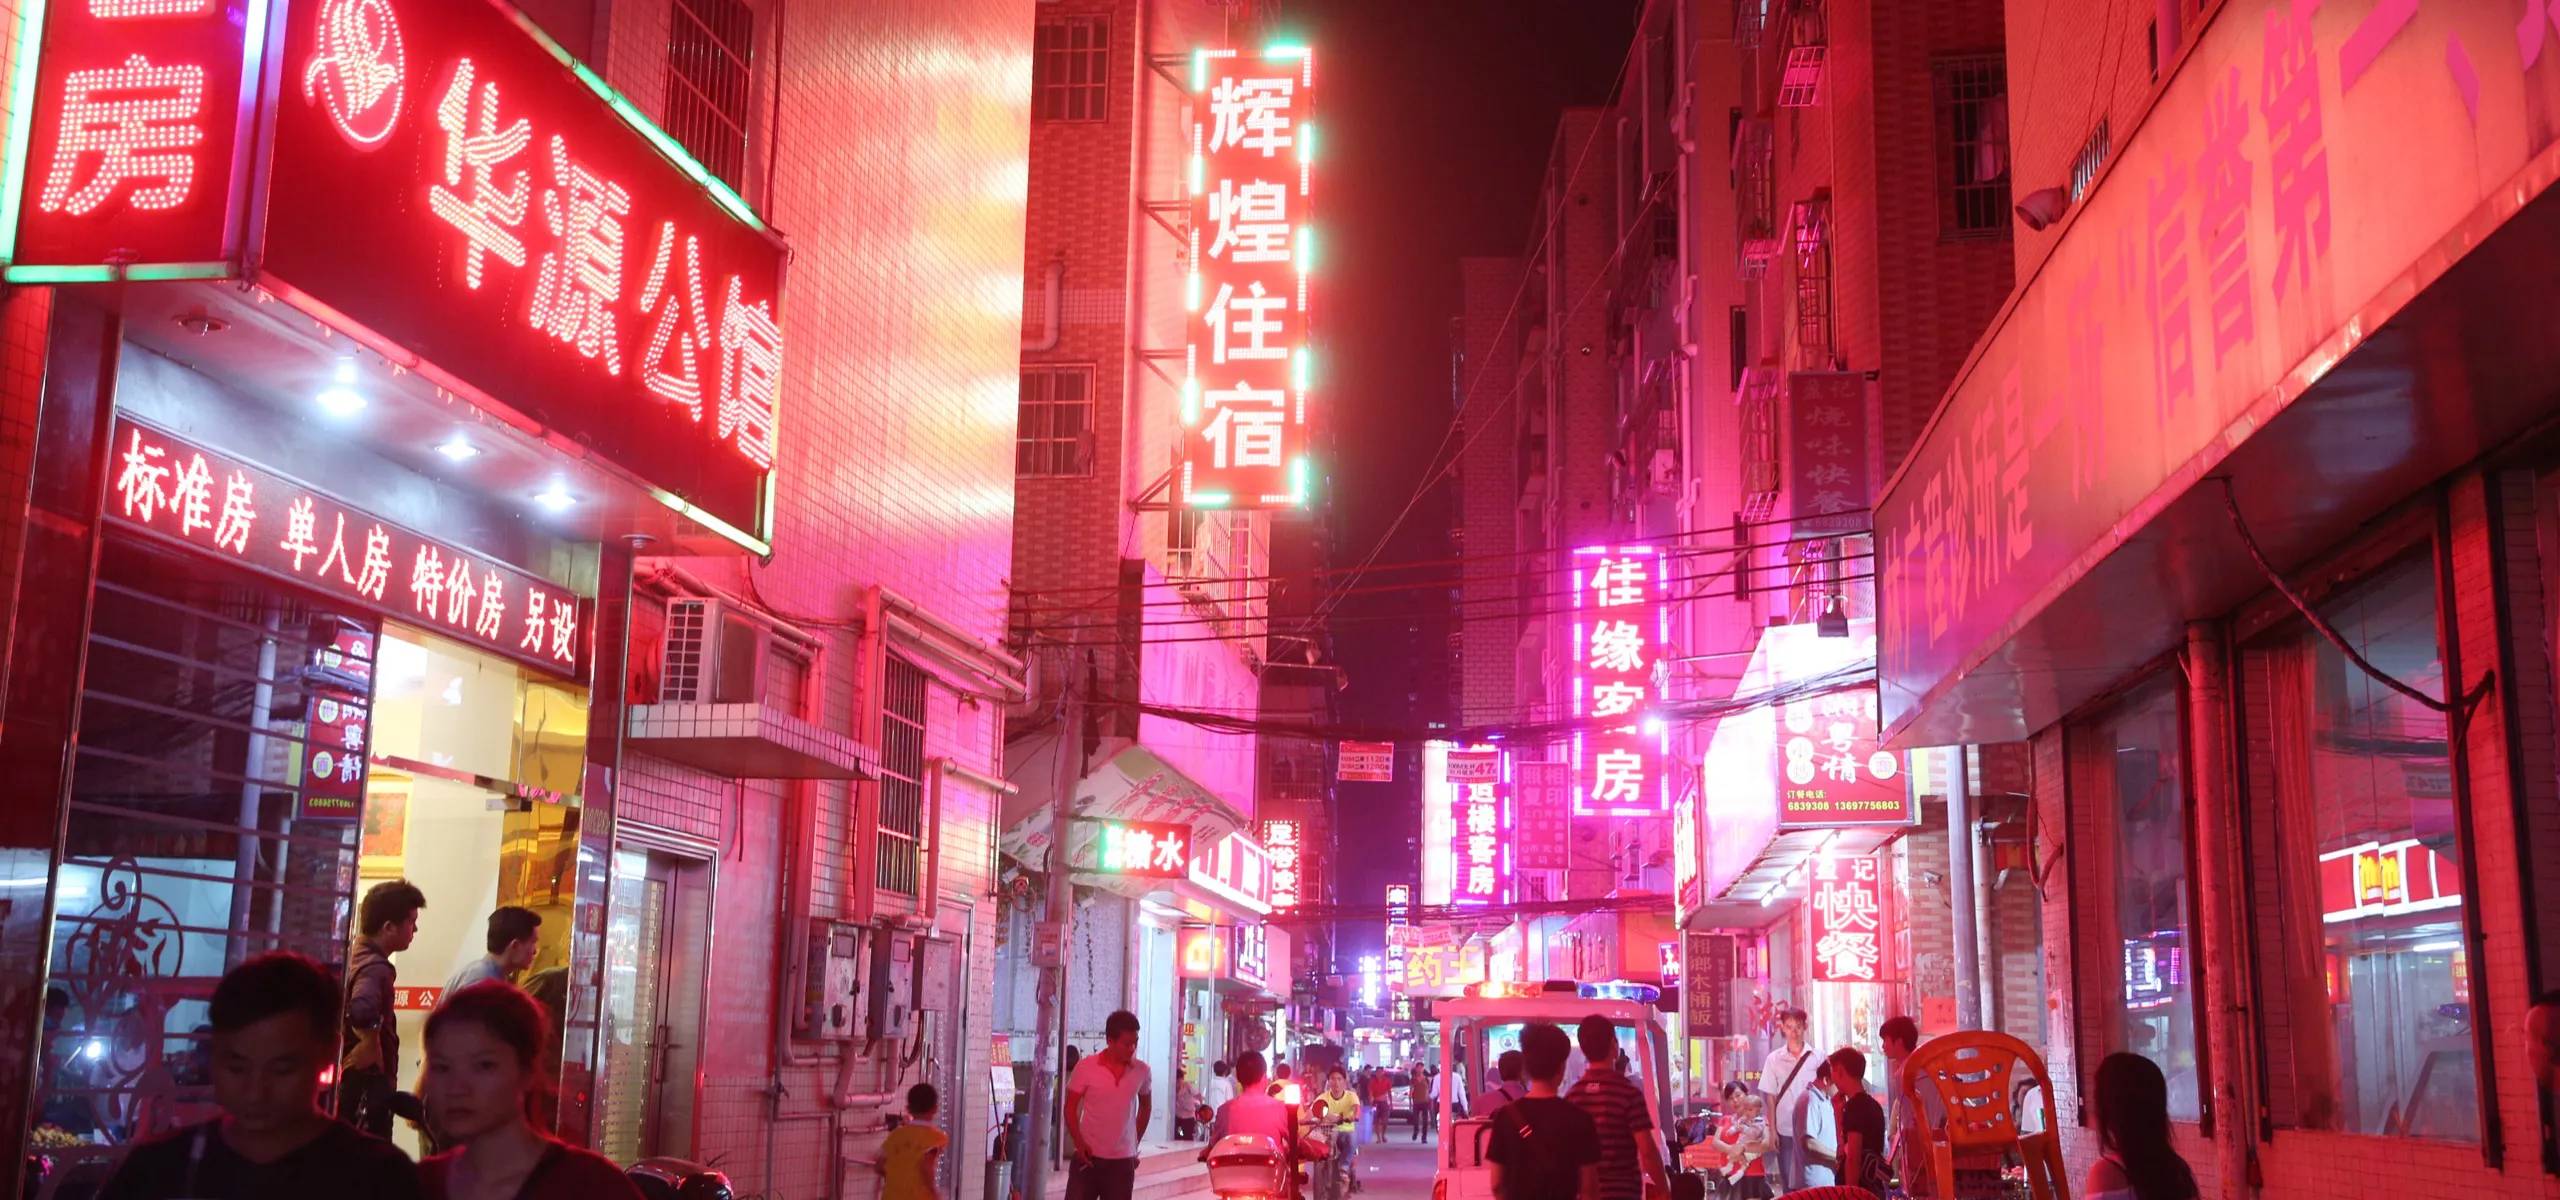 Streets with red lights